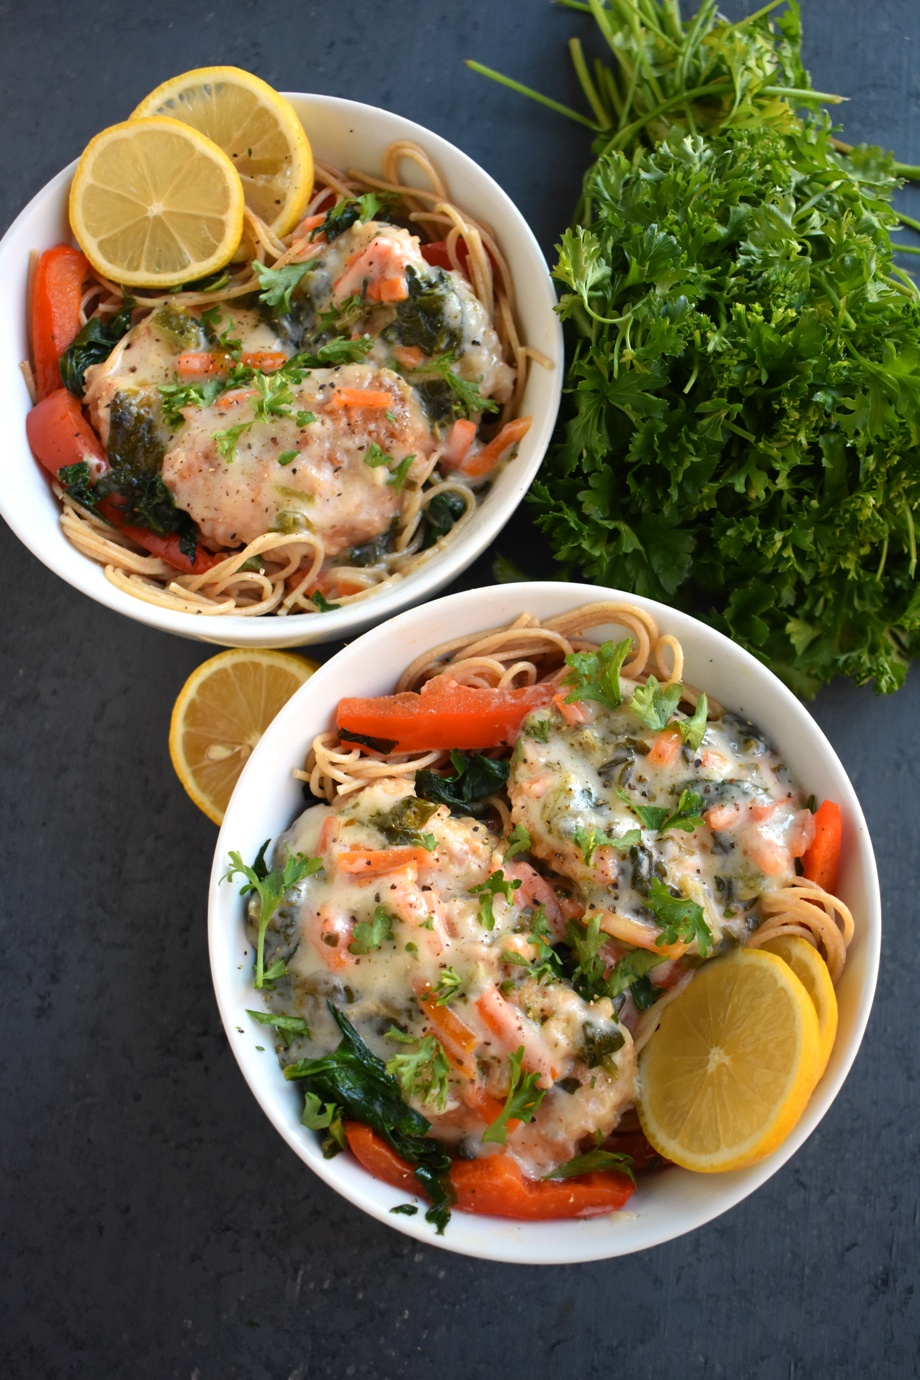  White Wine Lemon Chicken features a creamy white wine lemon sauce with spinach, carrots and red peppers served over angel hair pasta and is ready in just 15 minutes! www.nutritionistreviews.com #dinner #easydinner #chicken #pasta